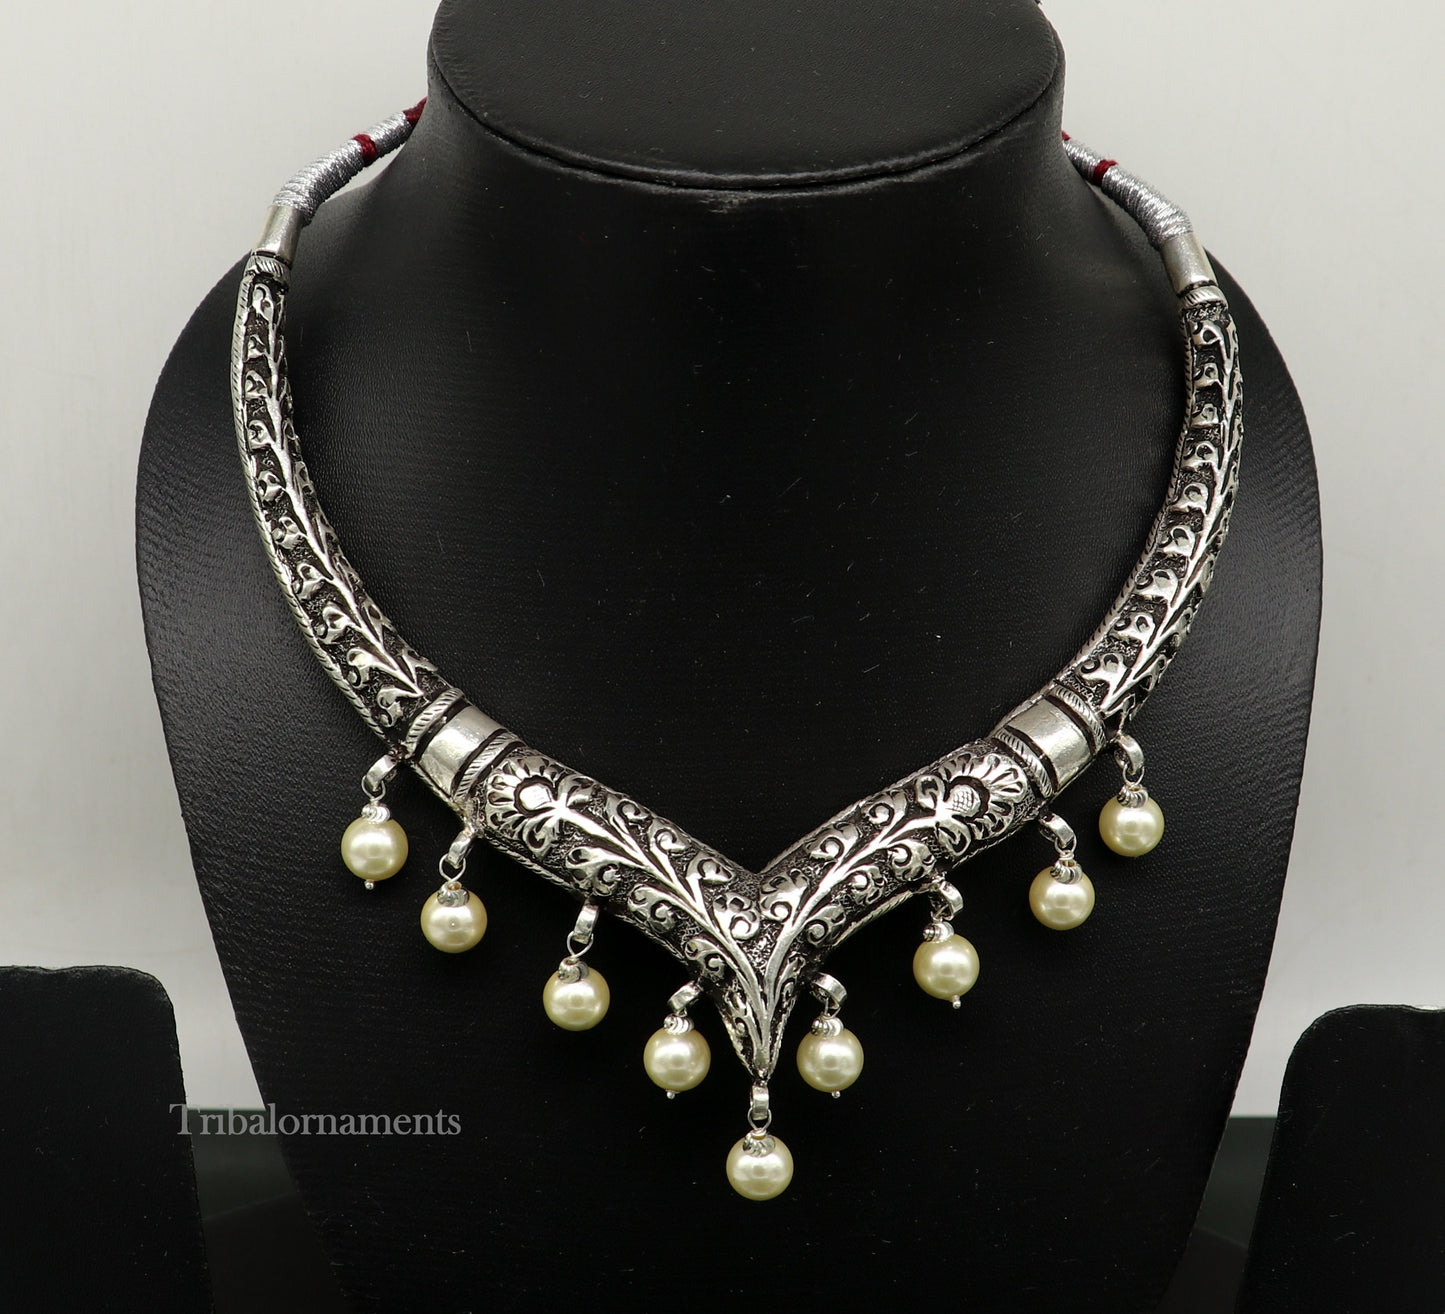 Vintage Indian traditional style trendy 92.5 sterling silver chitai/kandrai work charm necklace, choker tribal ethnic jewelry nec278 - TRIBAL ORNAMENTS